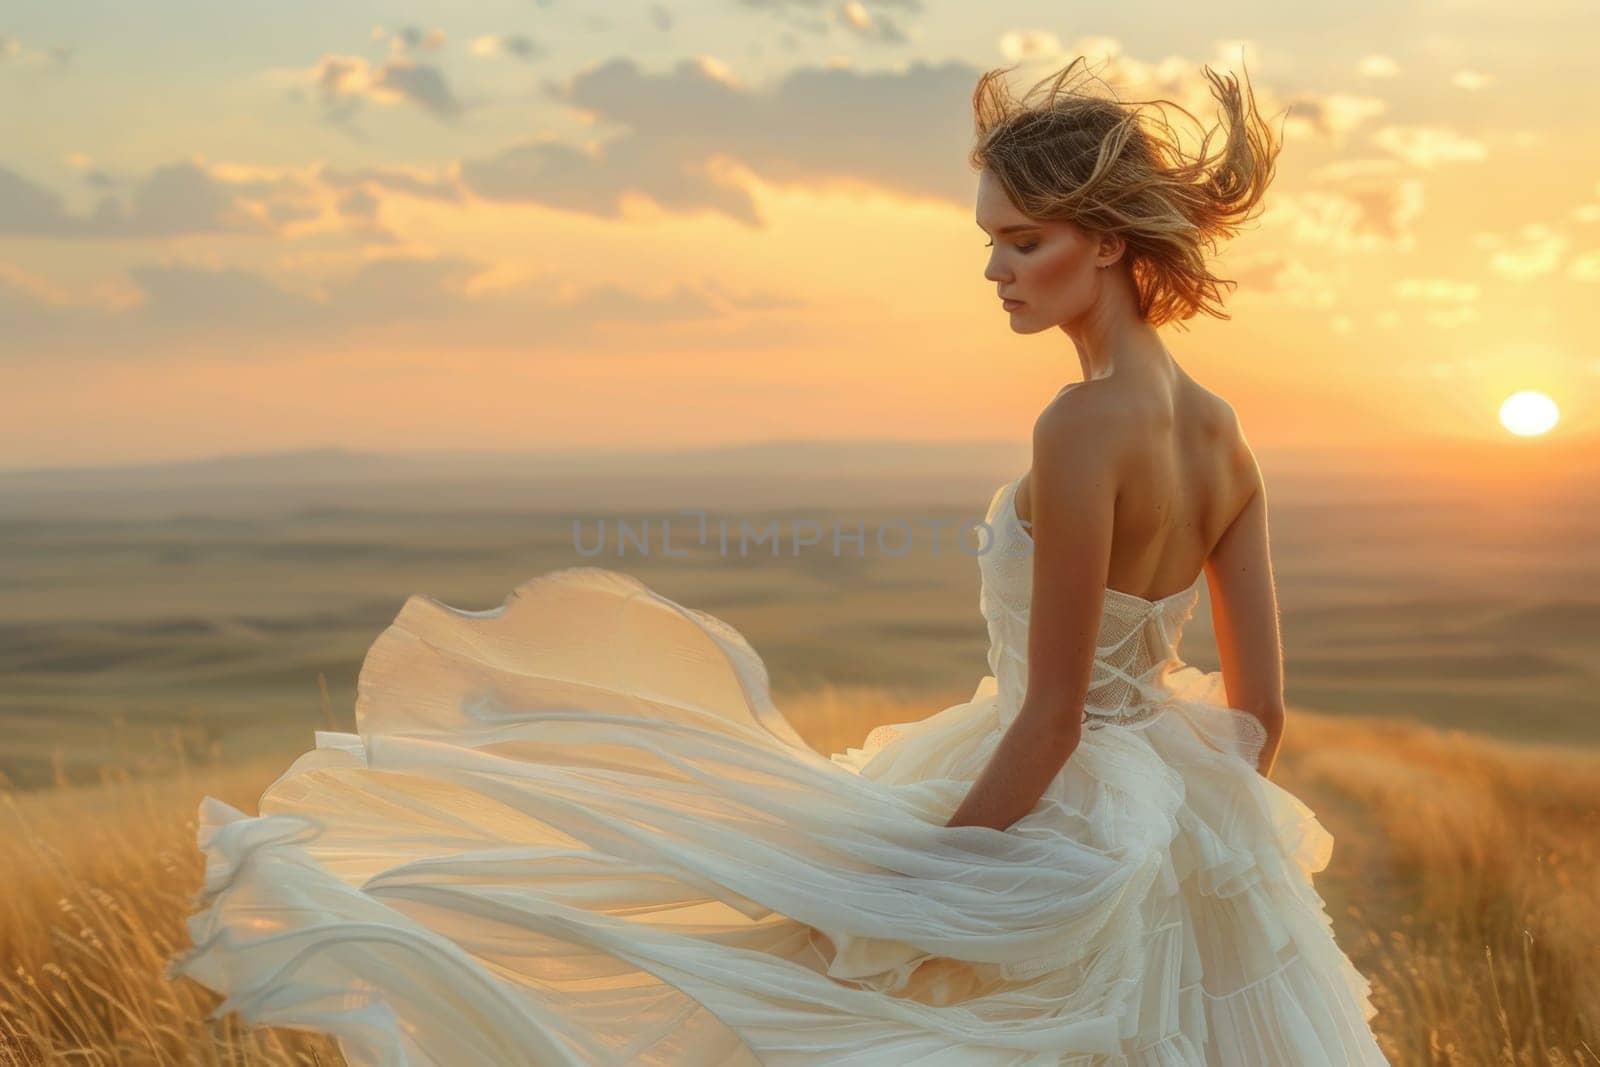 Woman Walking Through White Dress in Field by but_photo